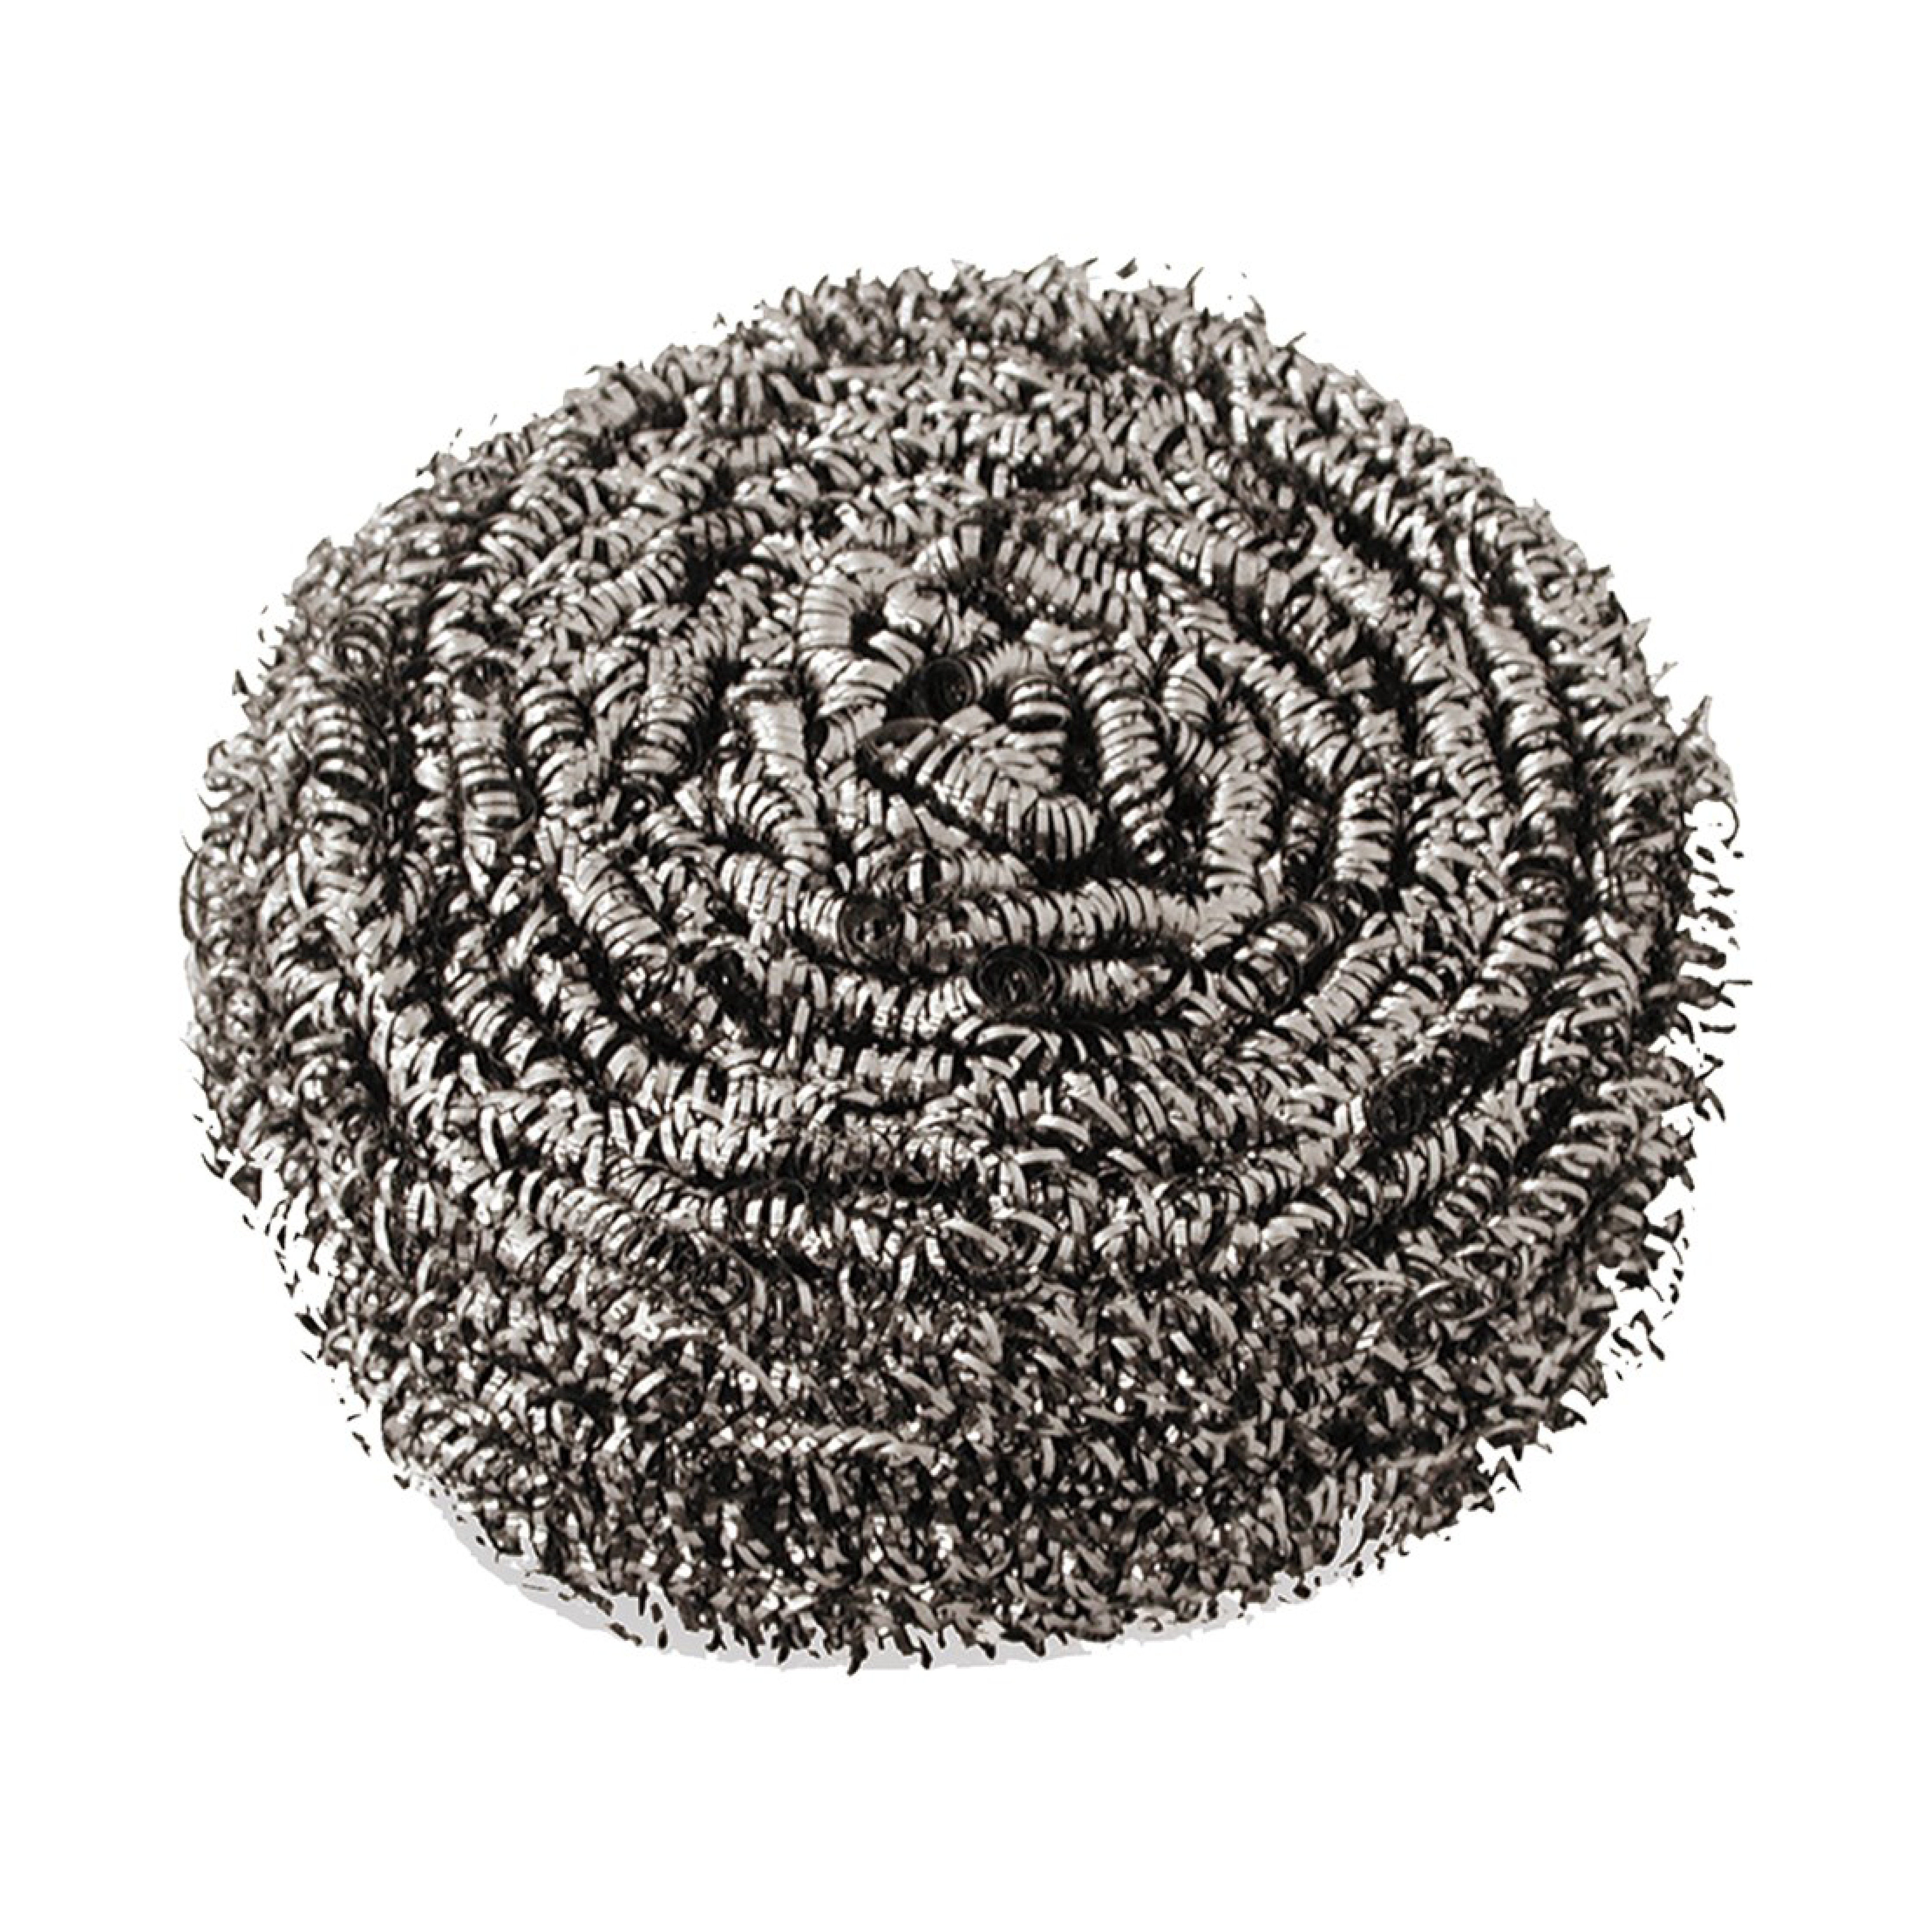 Stainless Steel Scourers 70gm (each)